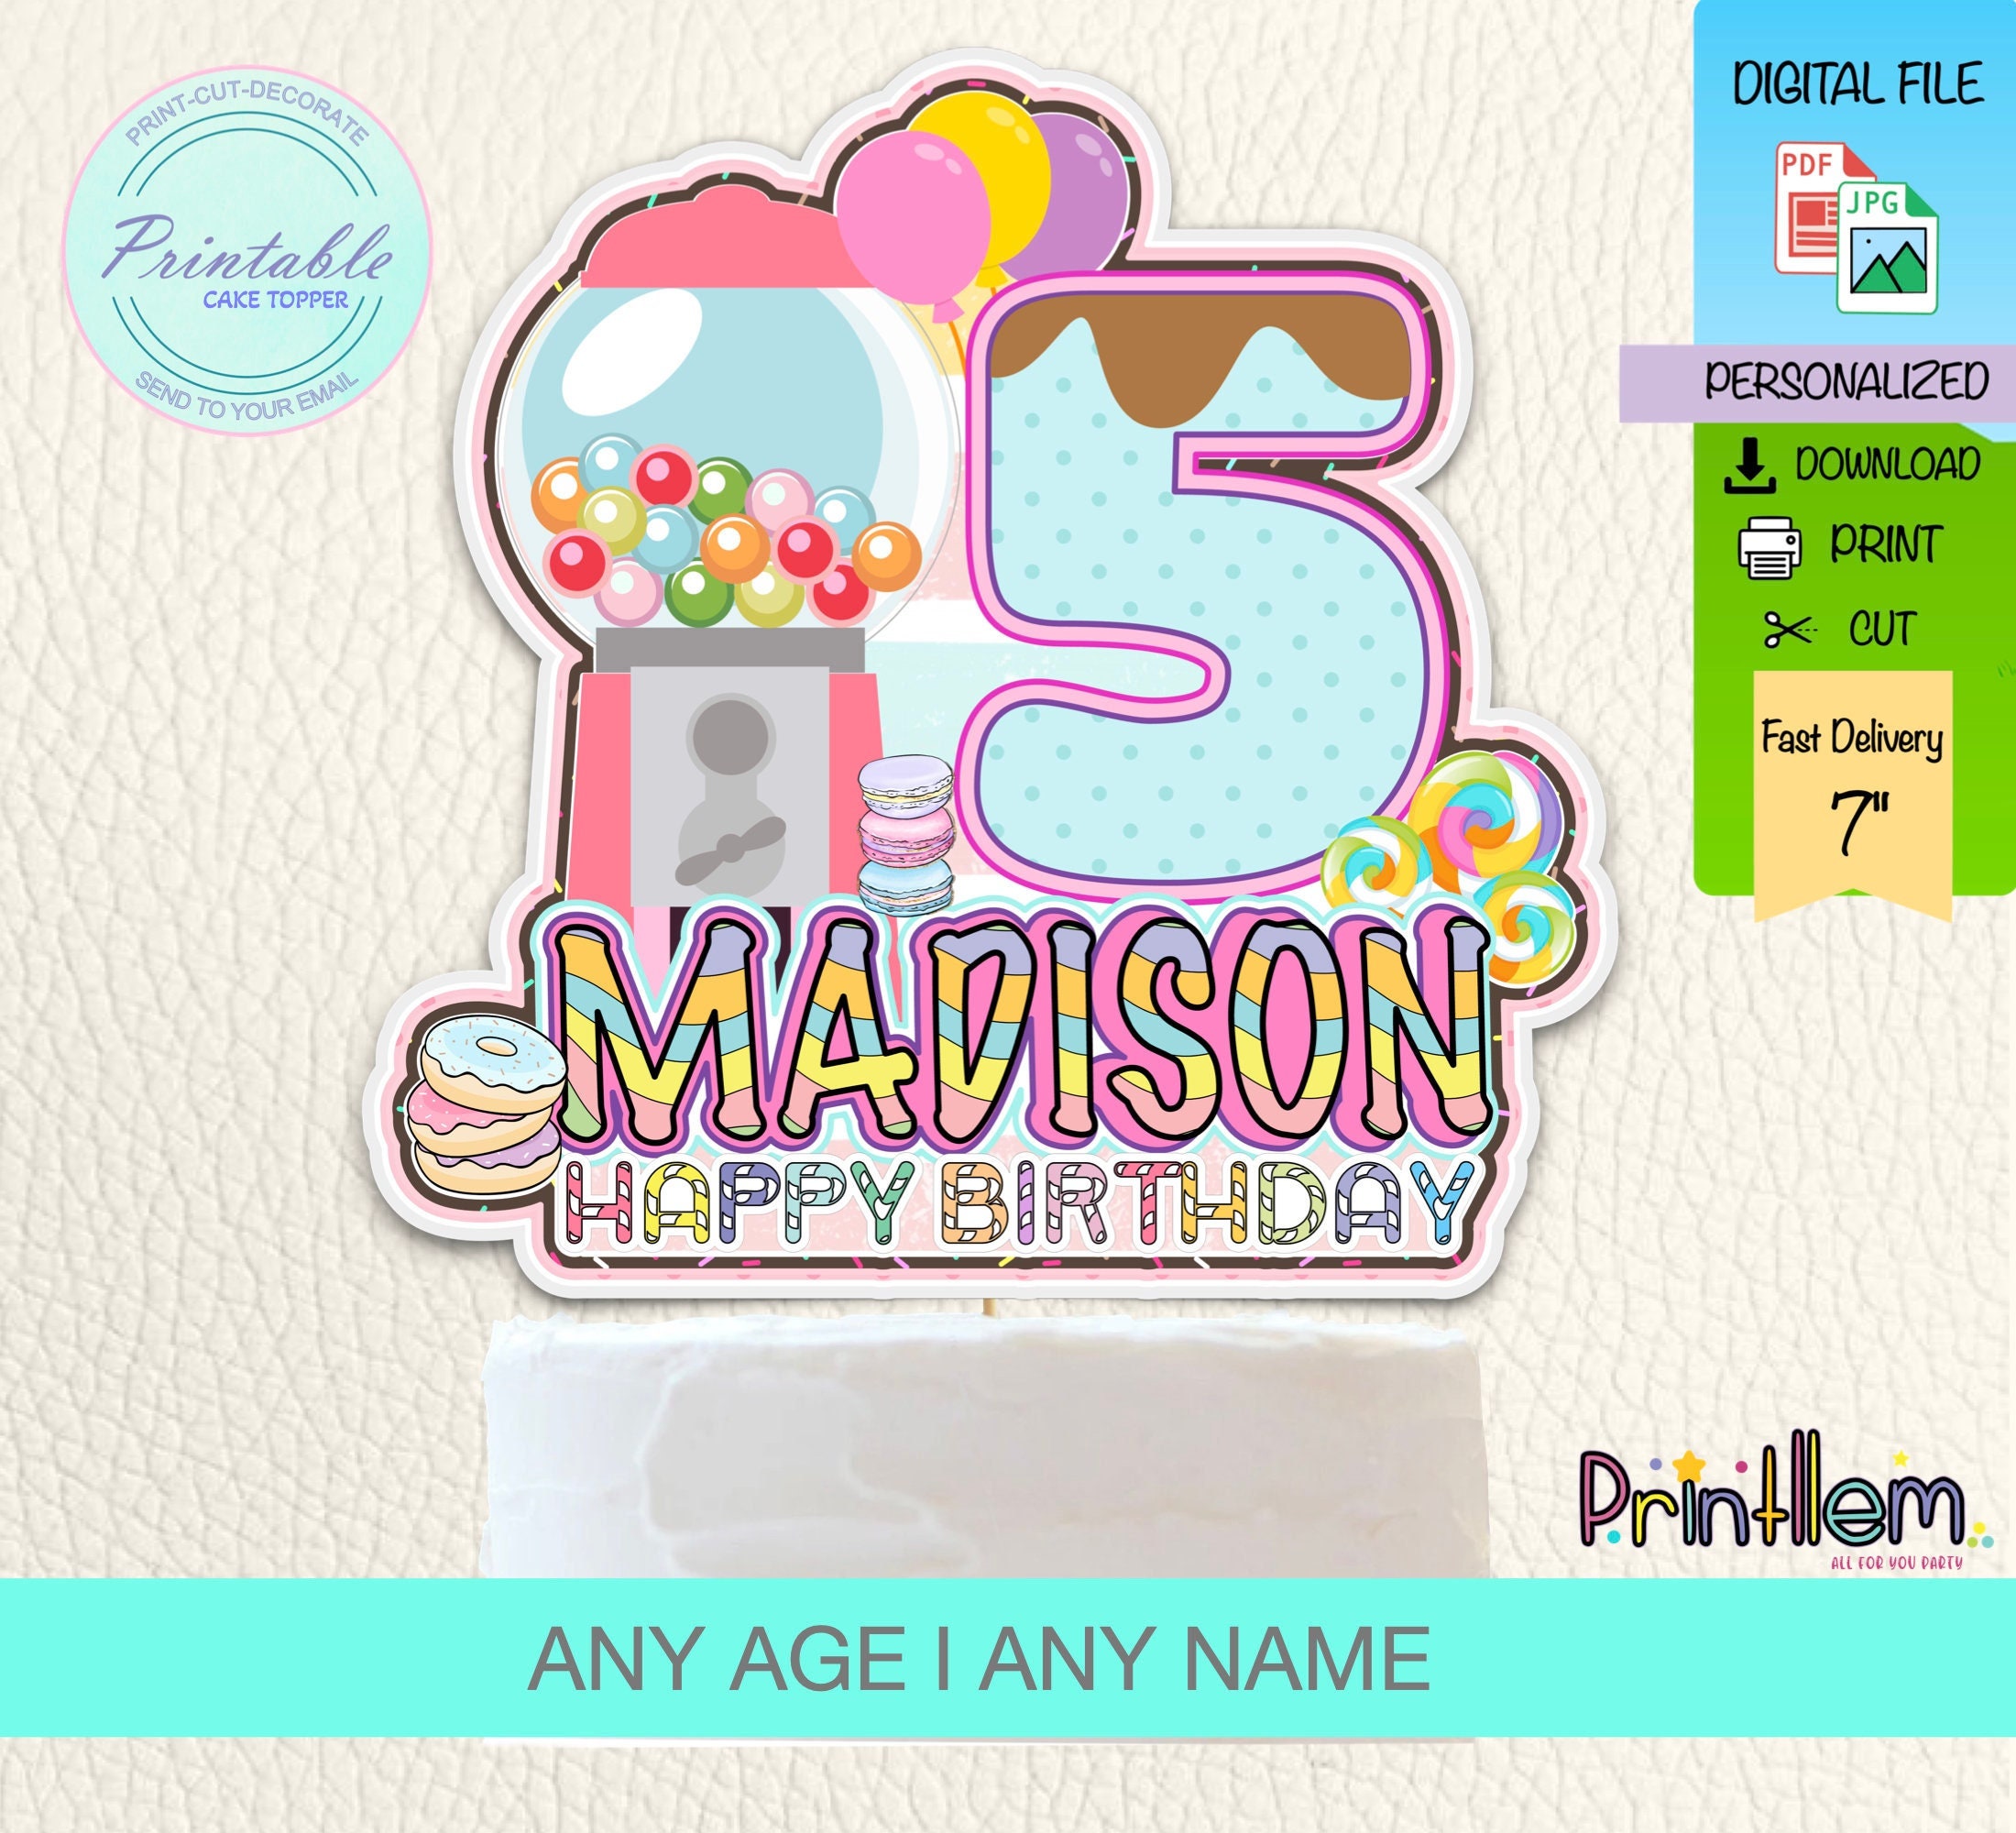 Buy Cake Toppers And Personalised At Candy Bar Sydney